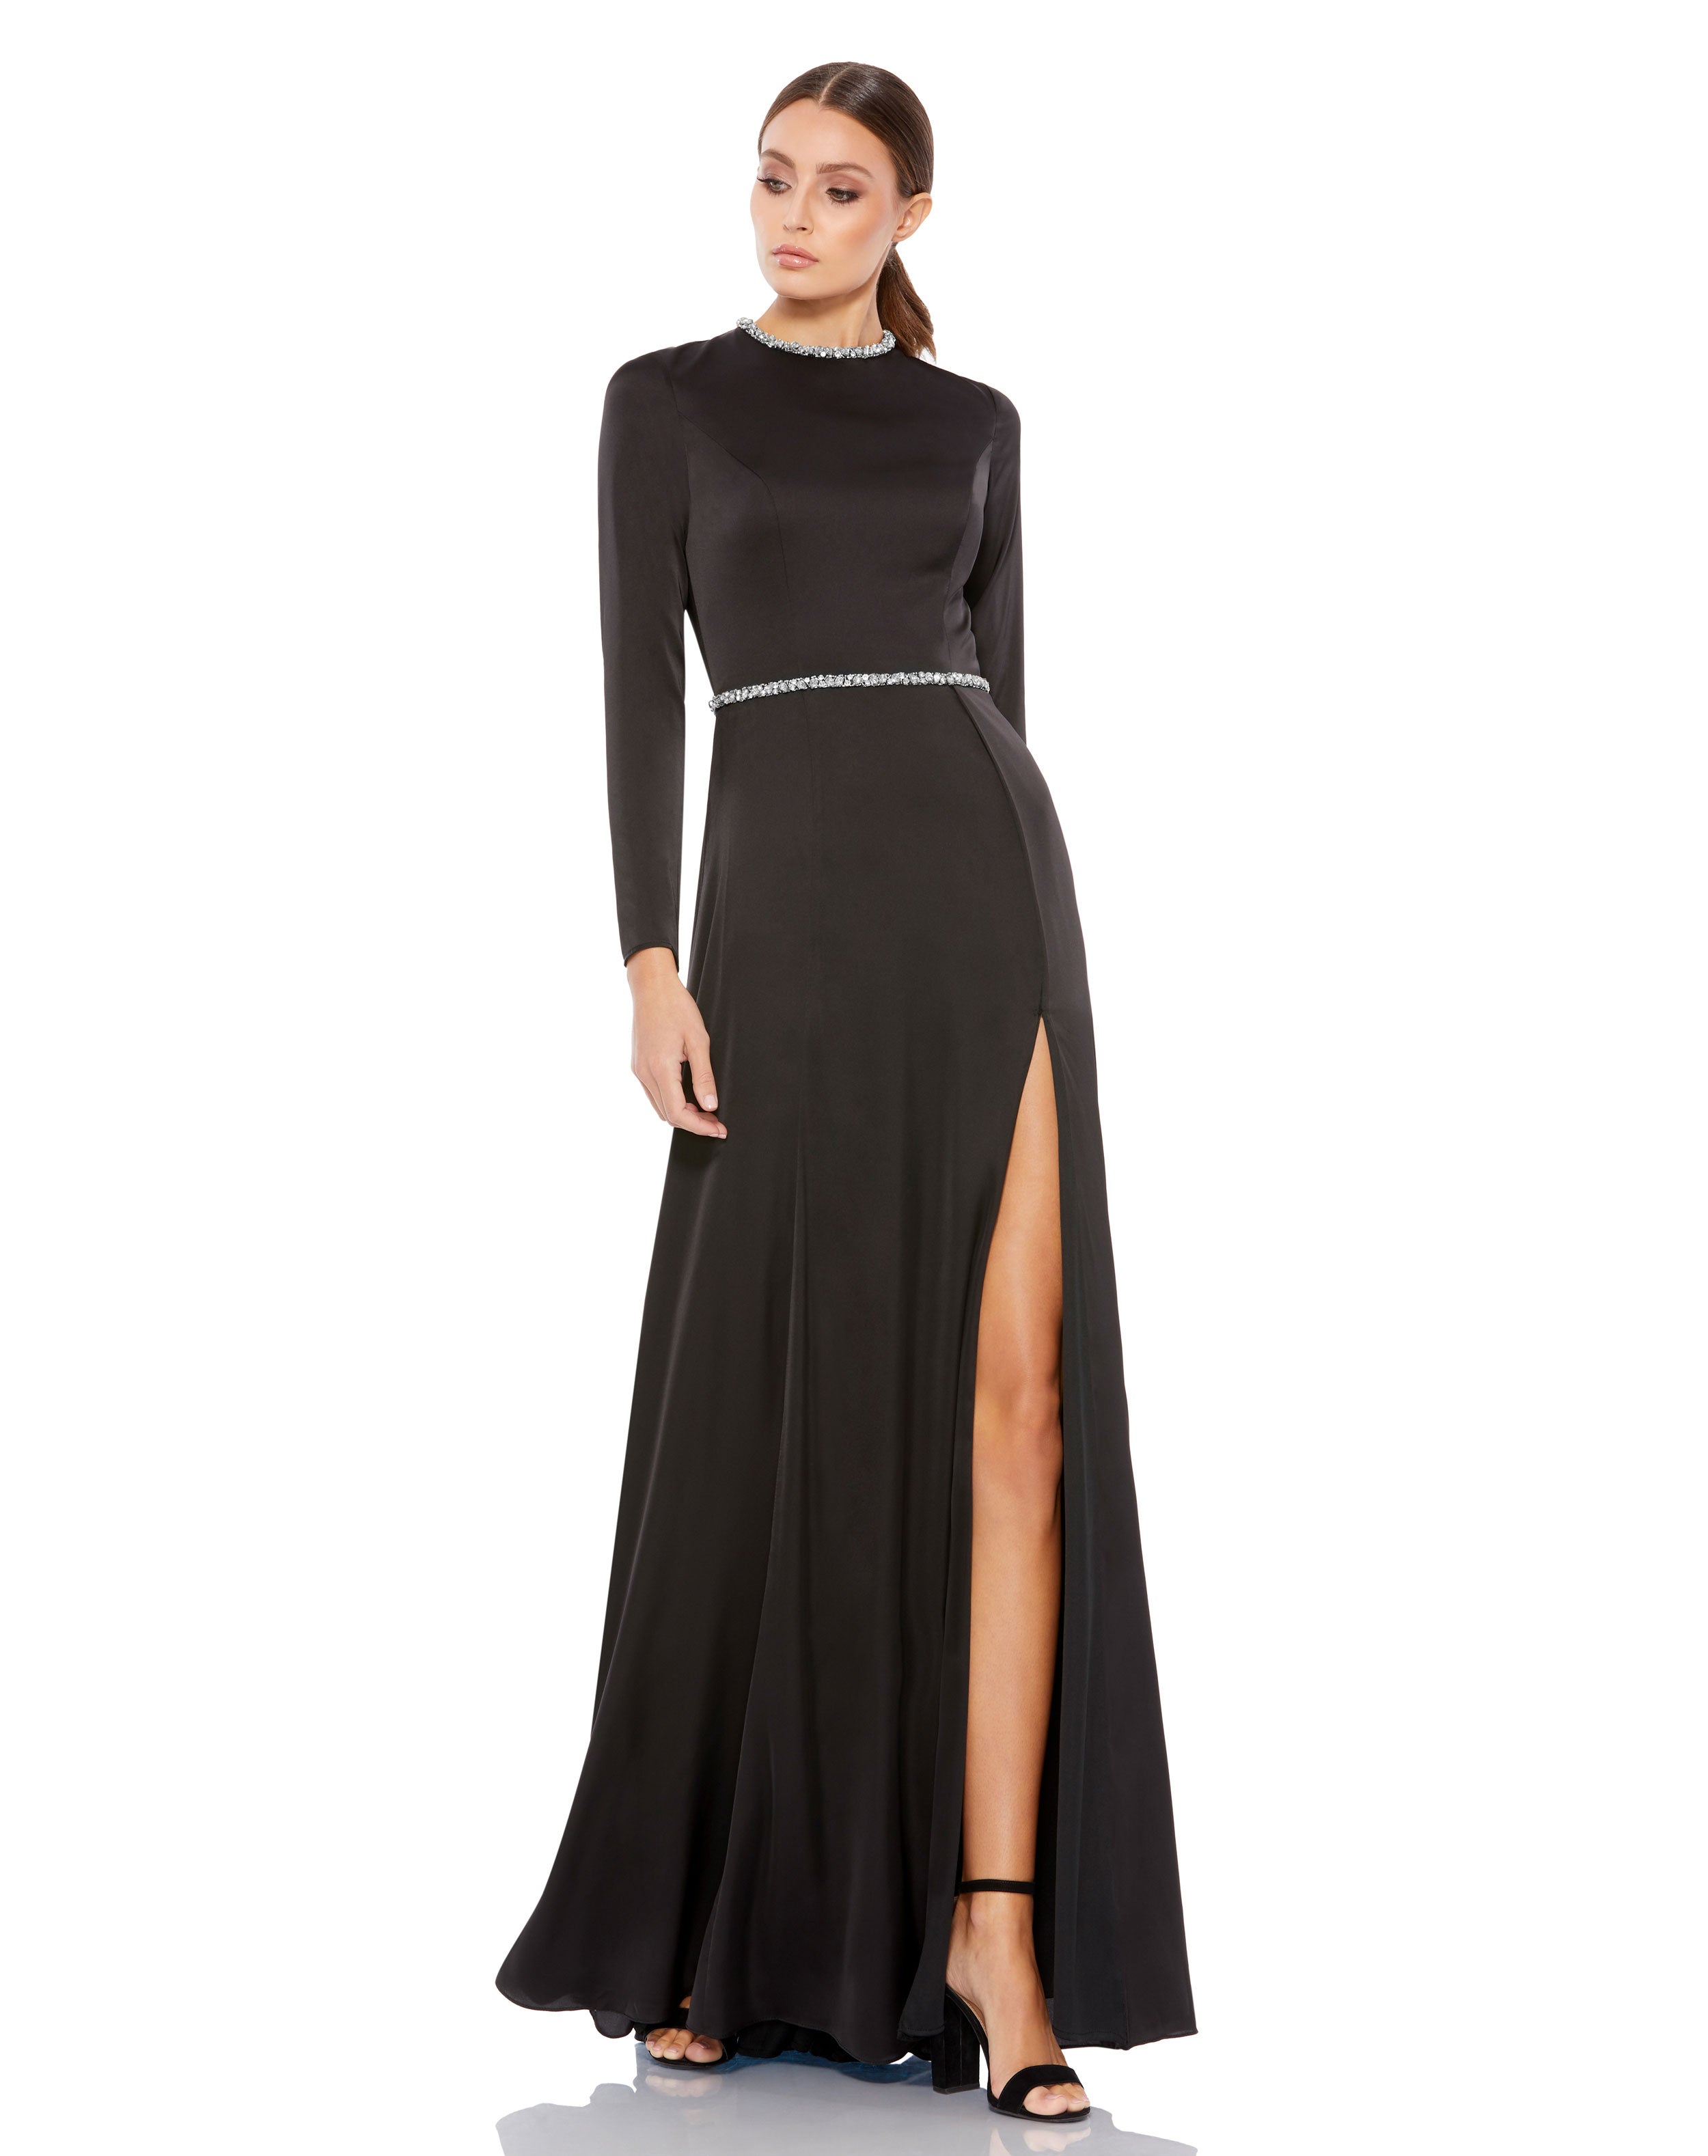 Long Sleeve Jewel Trimmed Charmeuse Gown - FINAL SALE